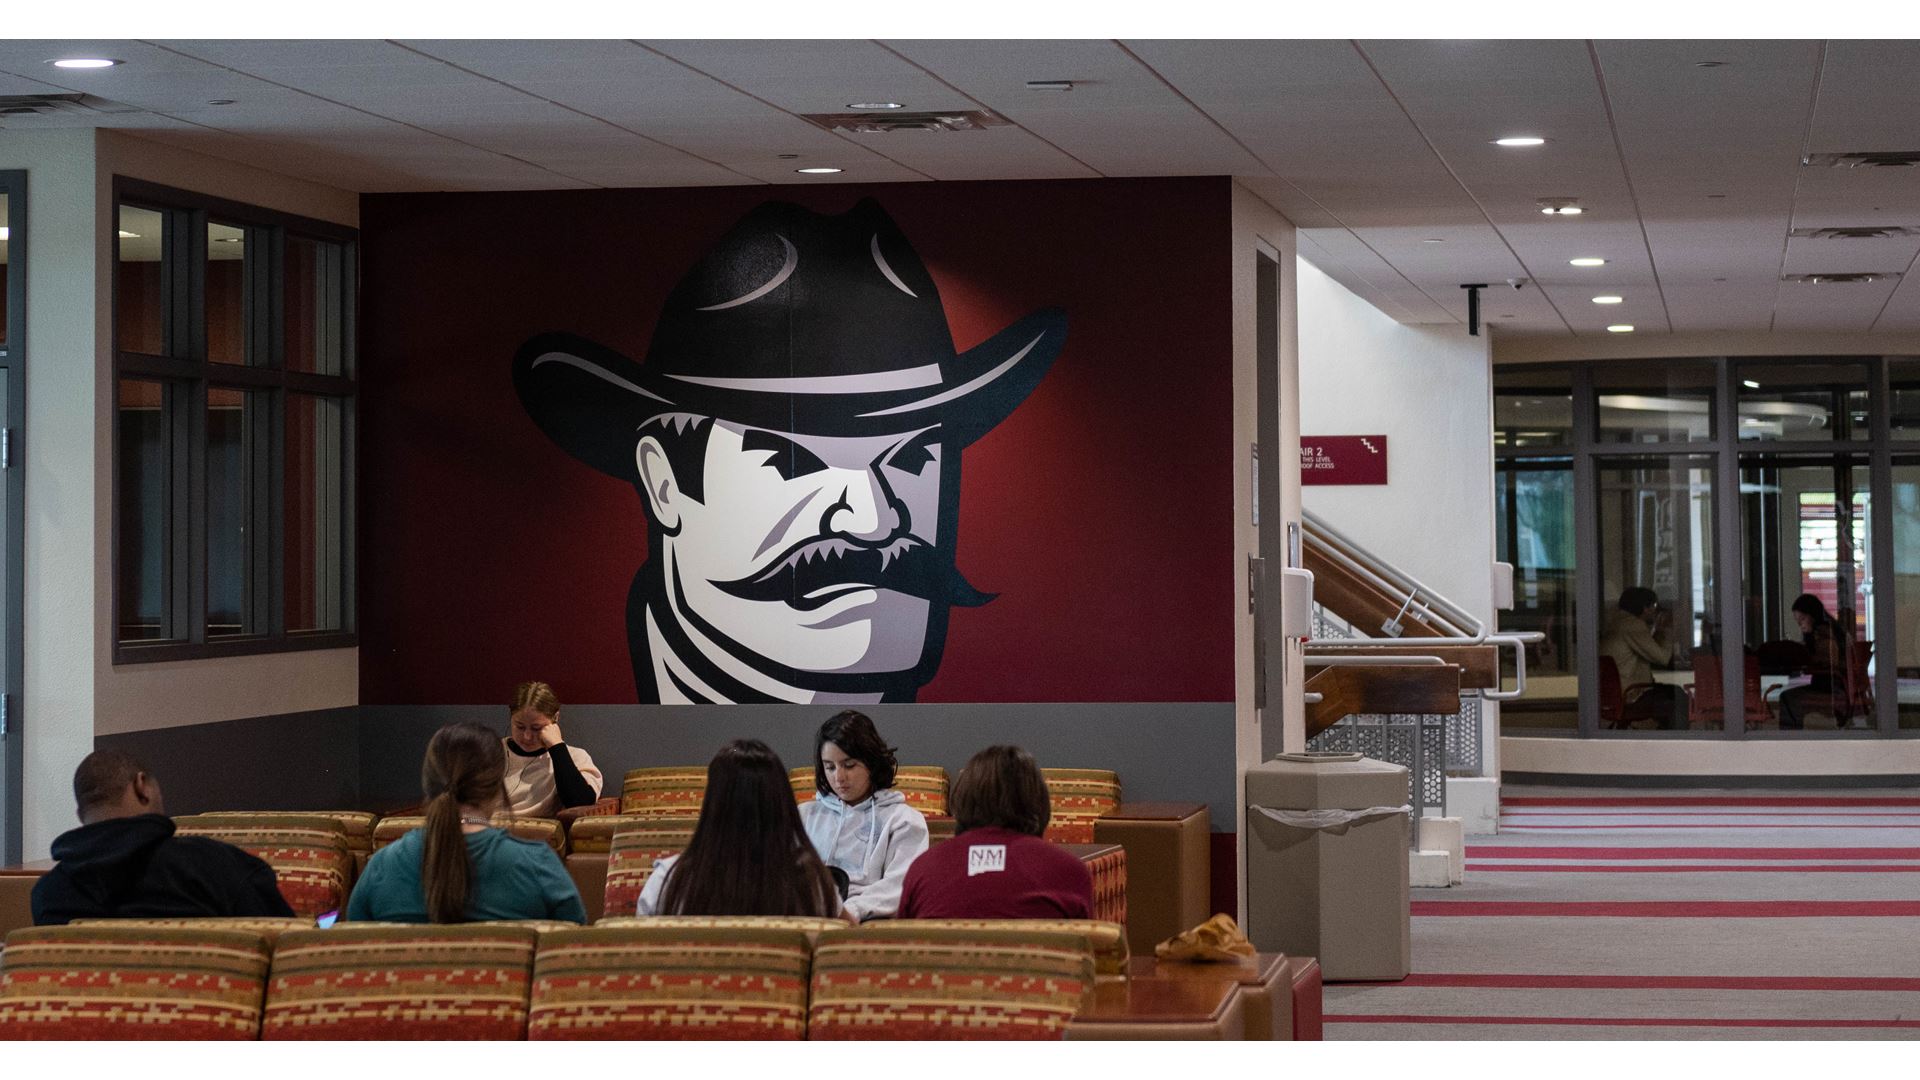 NMSU receives funding to advance student success, equity initiatives